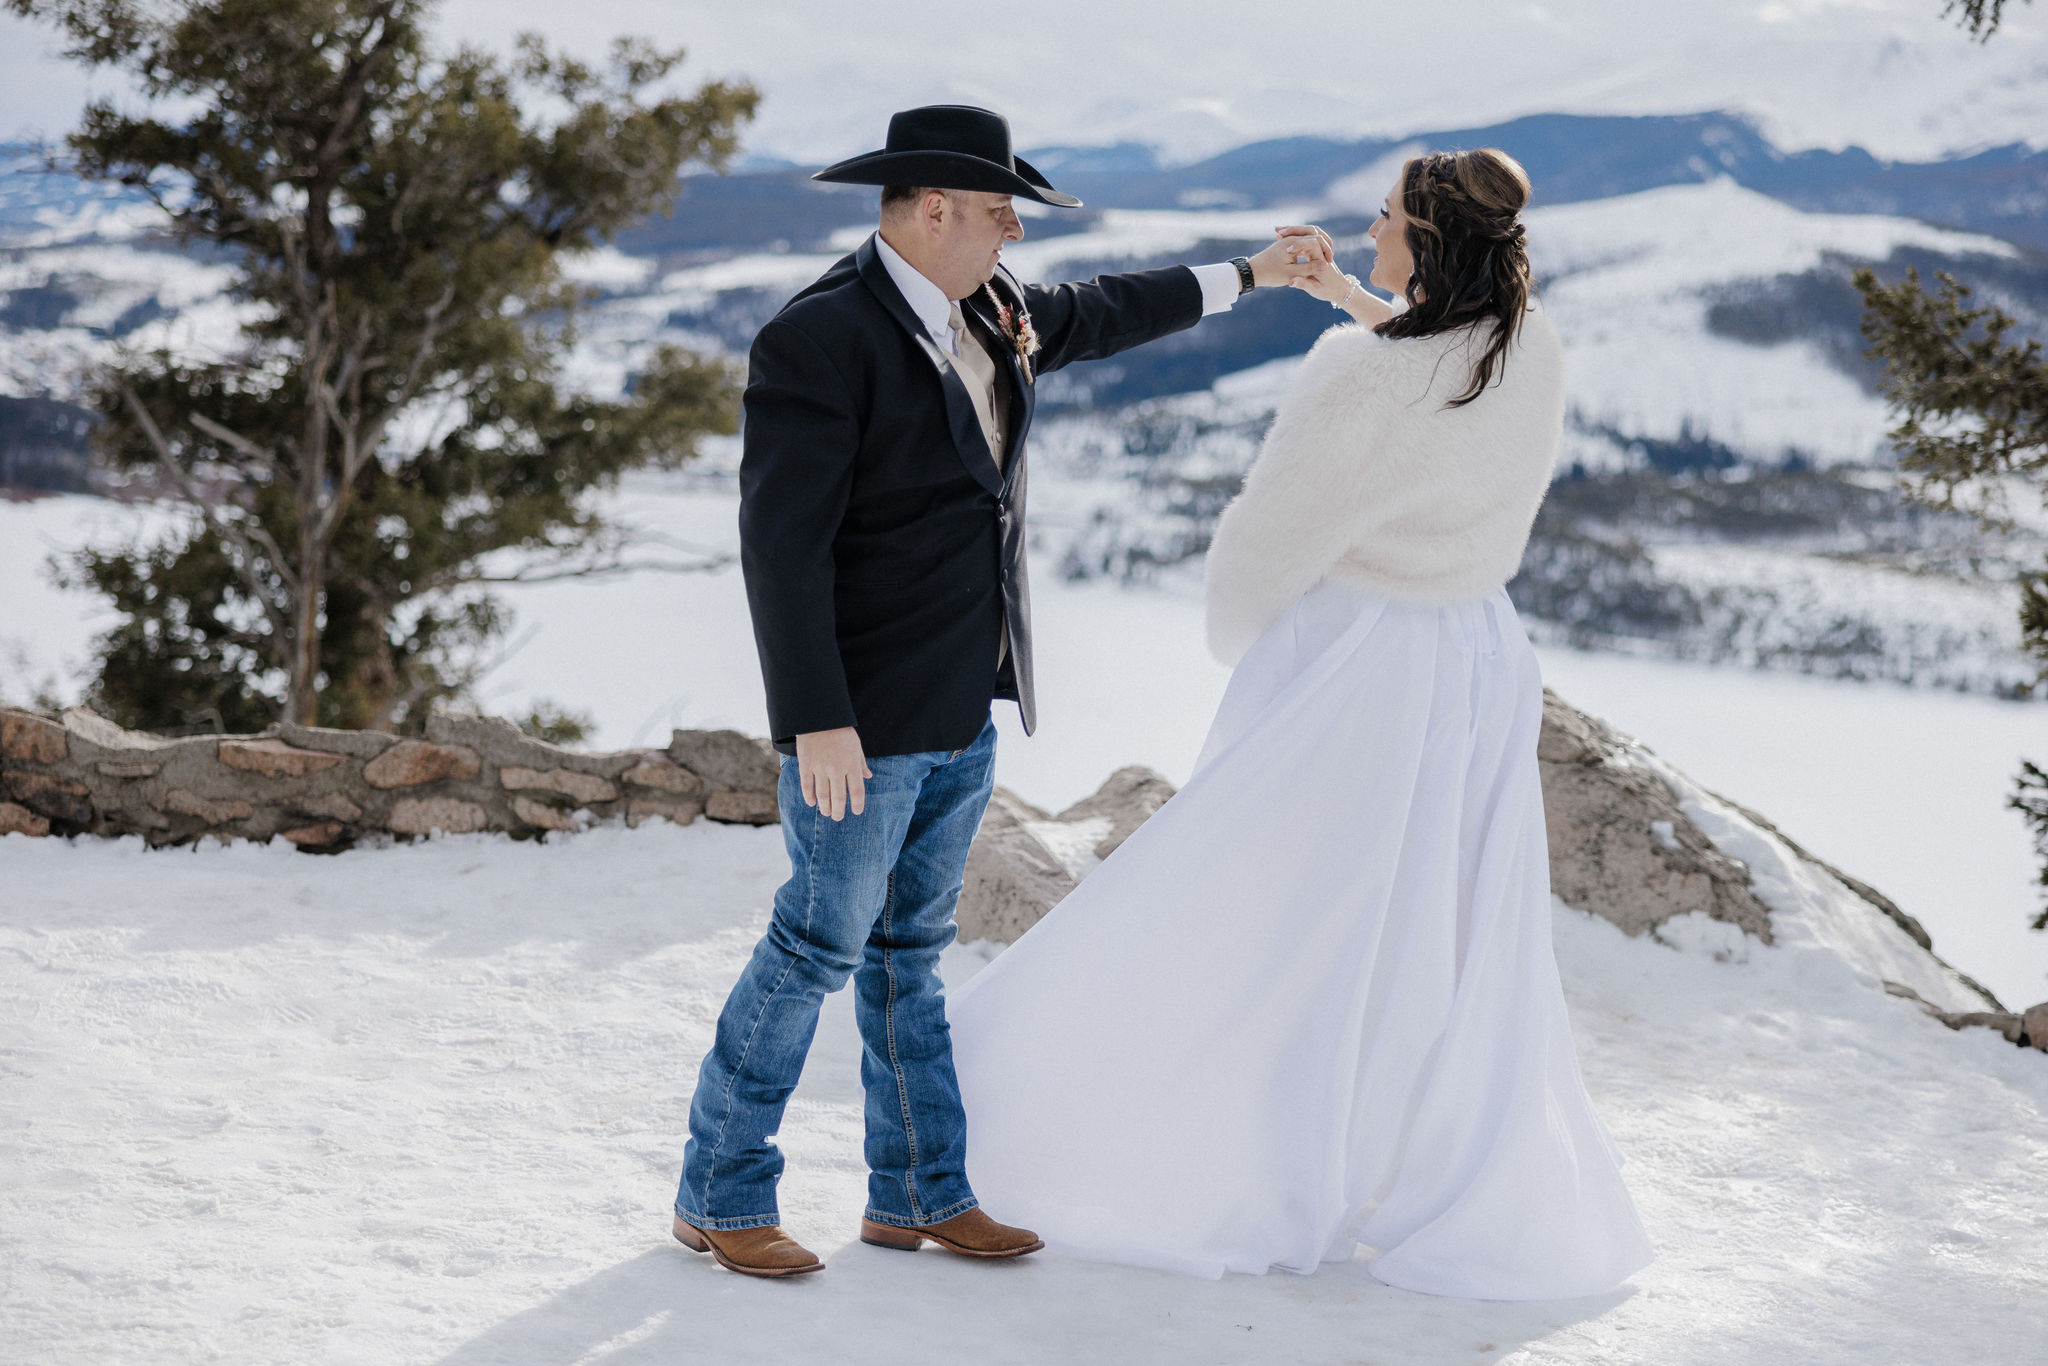 Bride and groom share first dance after eloping in Colorado.